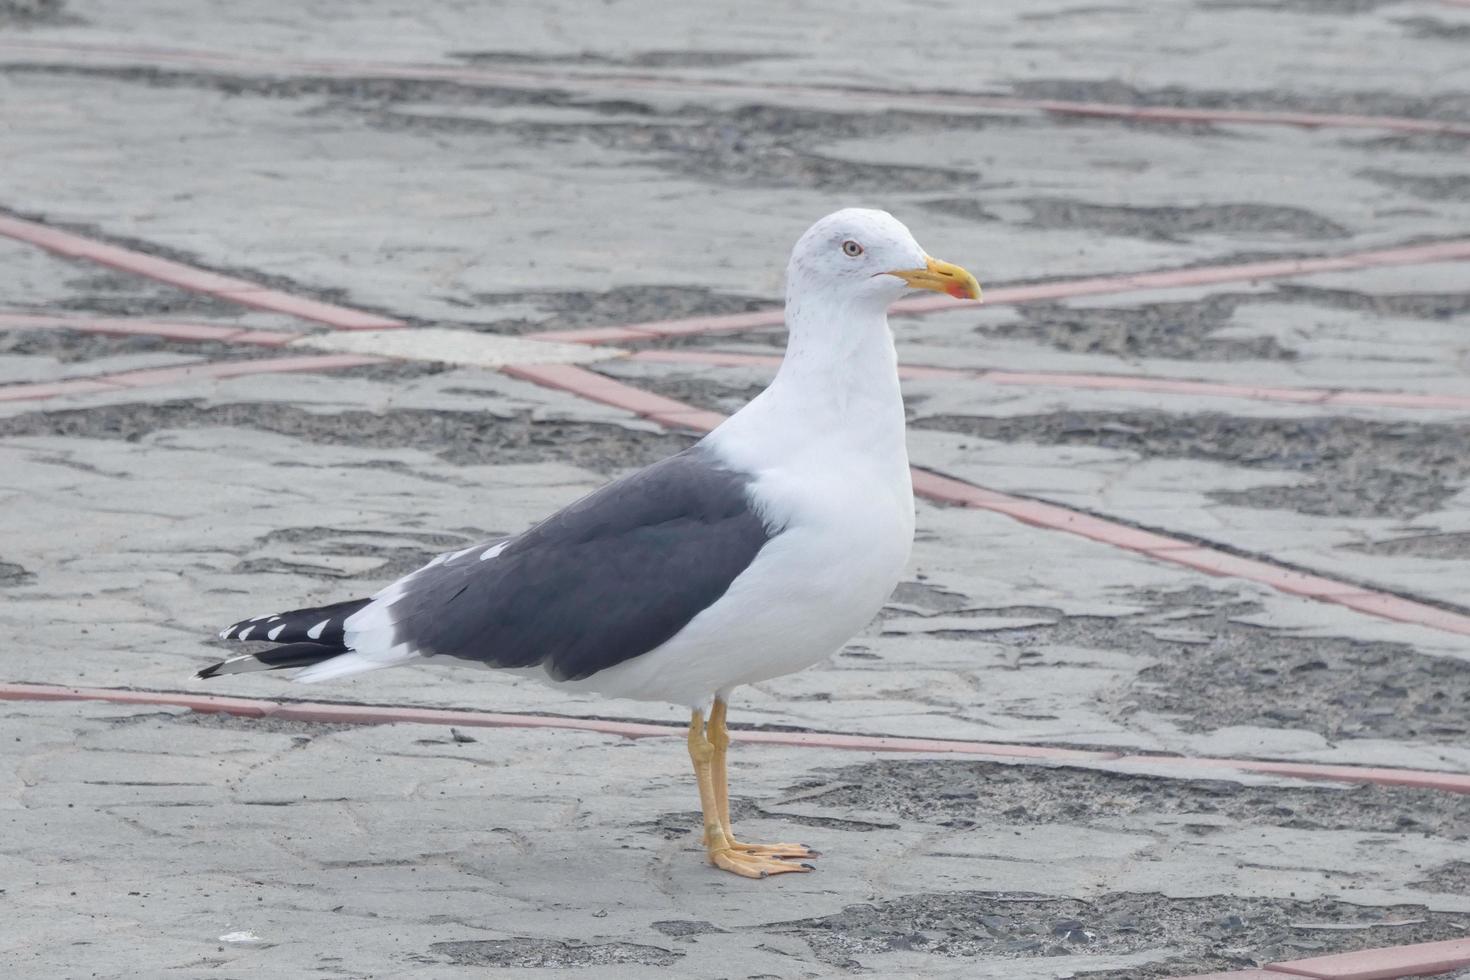 seagull at rest perched on the asphalt ground photo